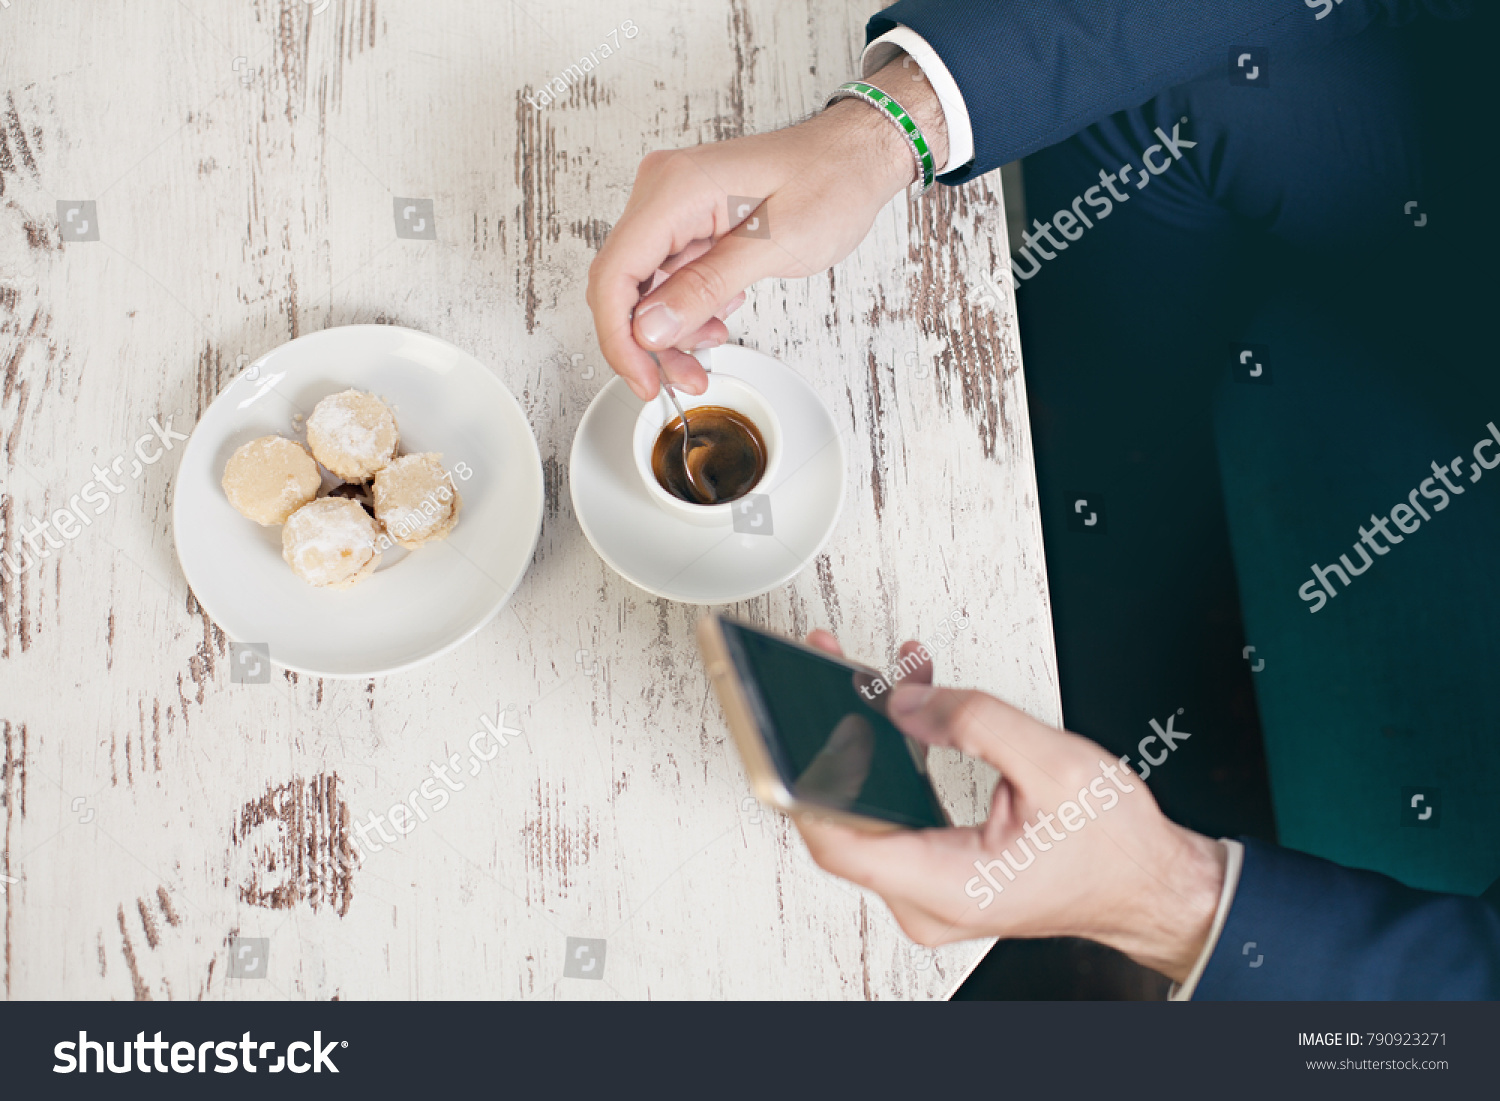 Top view of young  man using mobile phone sitting by cafe table drinking coffee and eating cookies #790923271